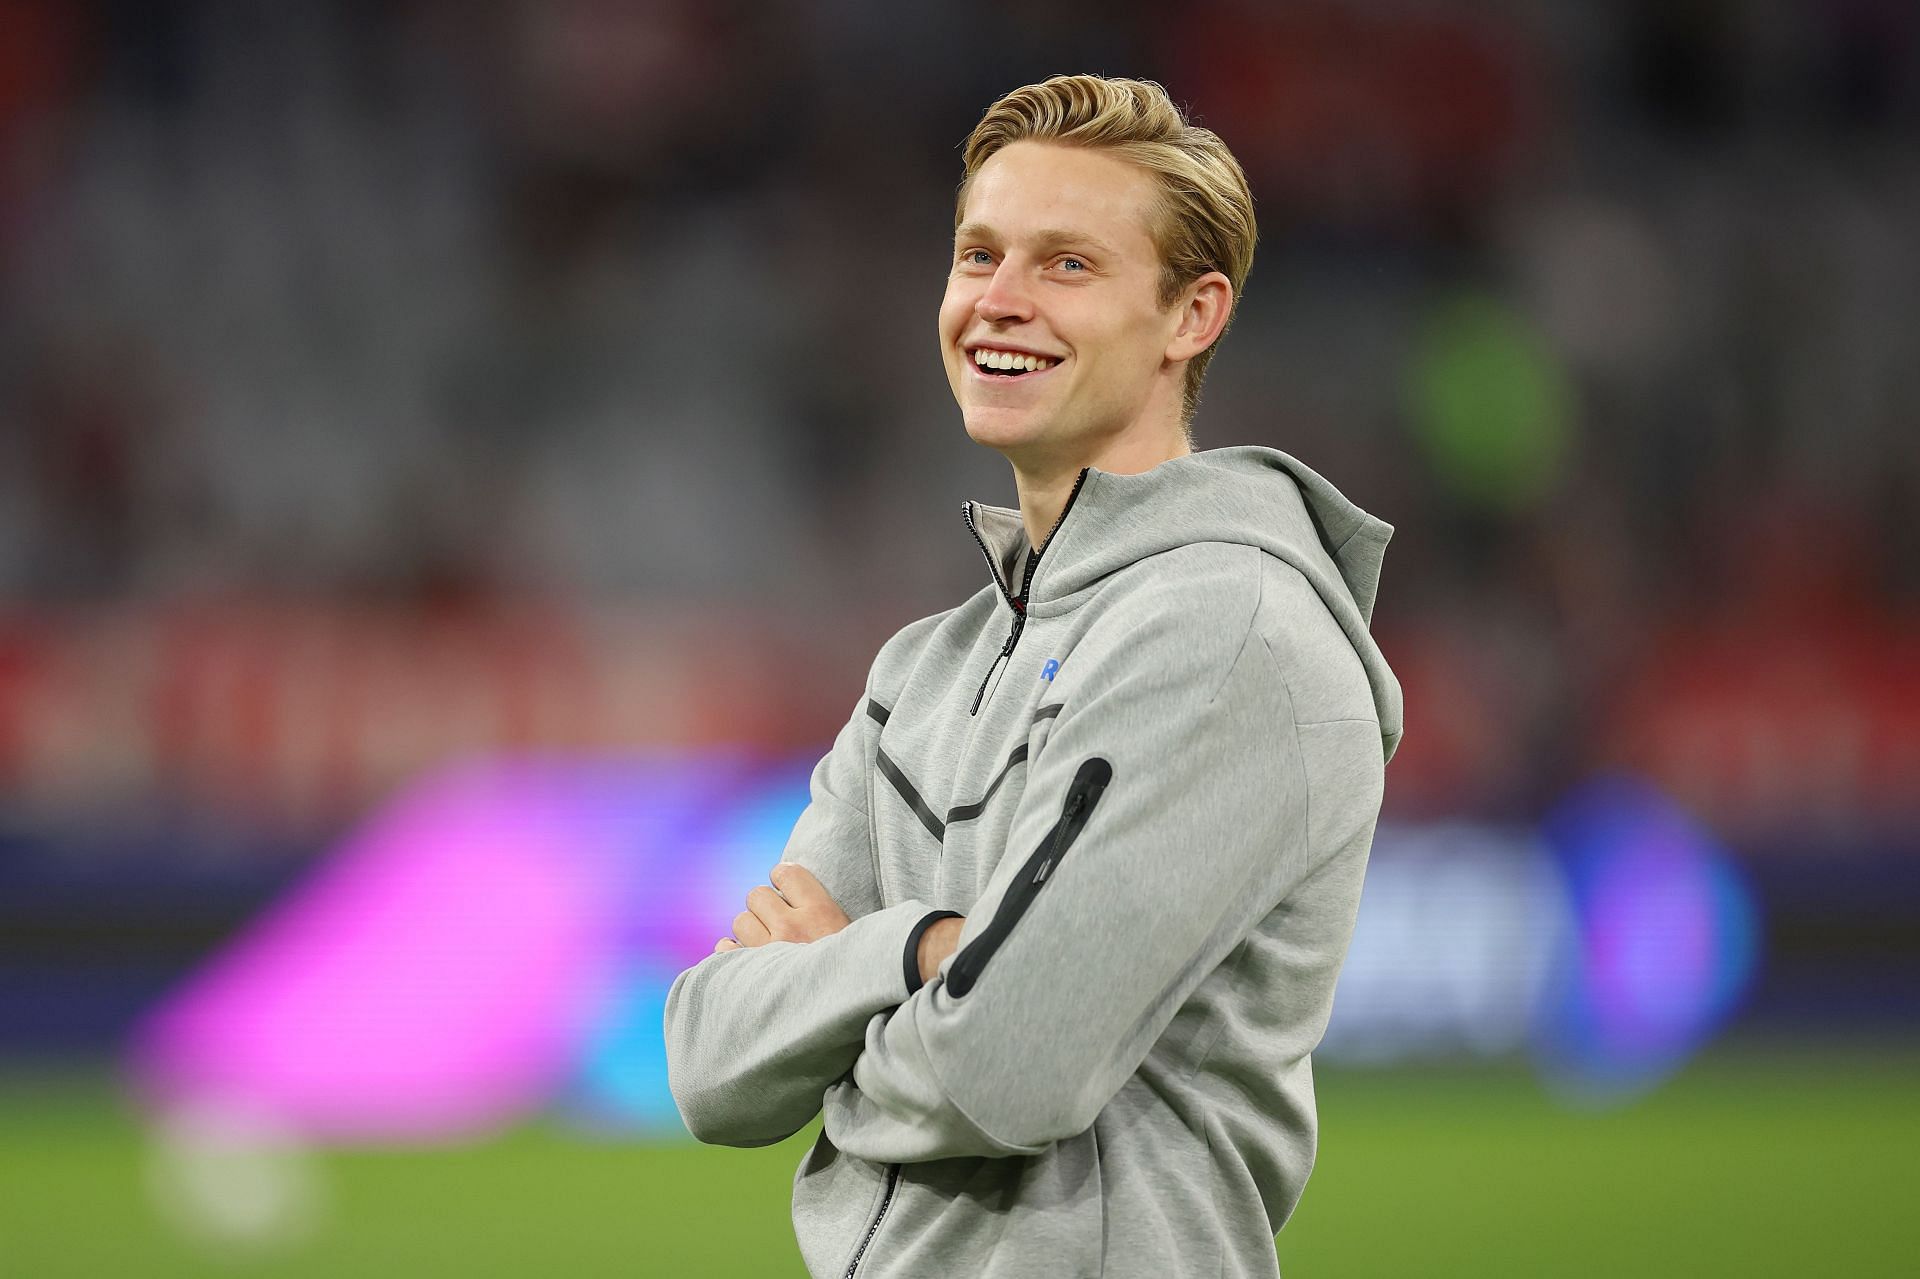 Frenkie de Jong has admirers at Old Trafford